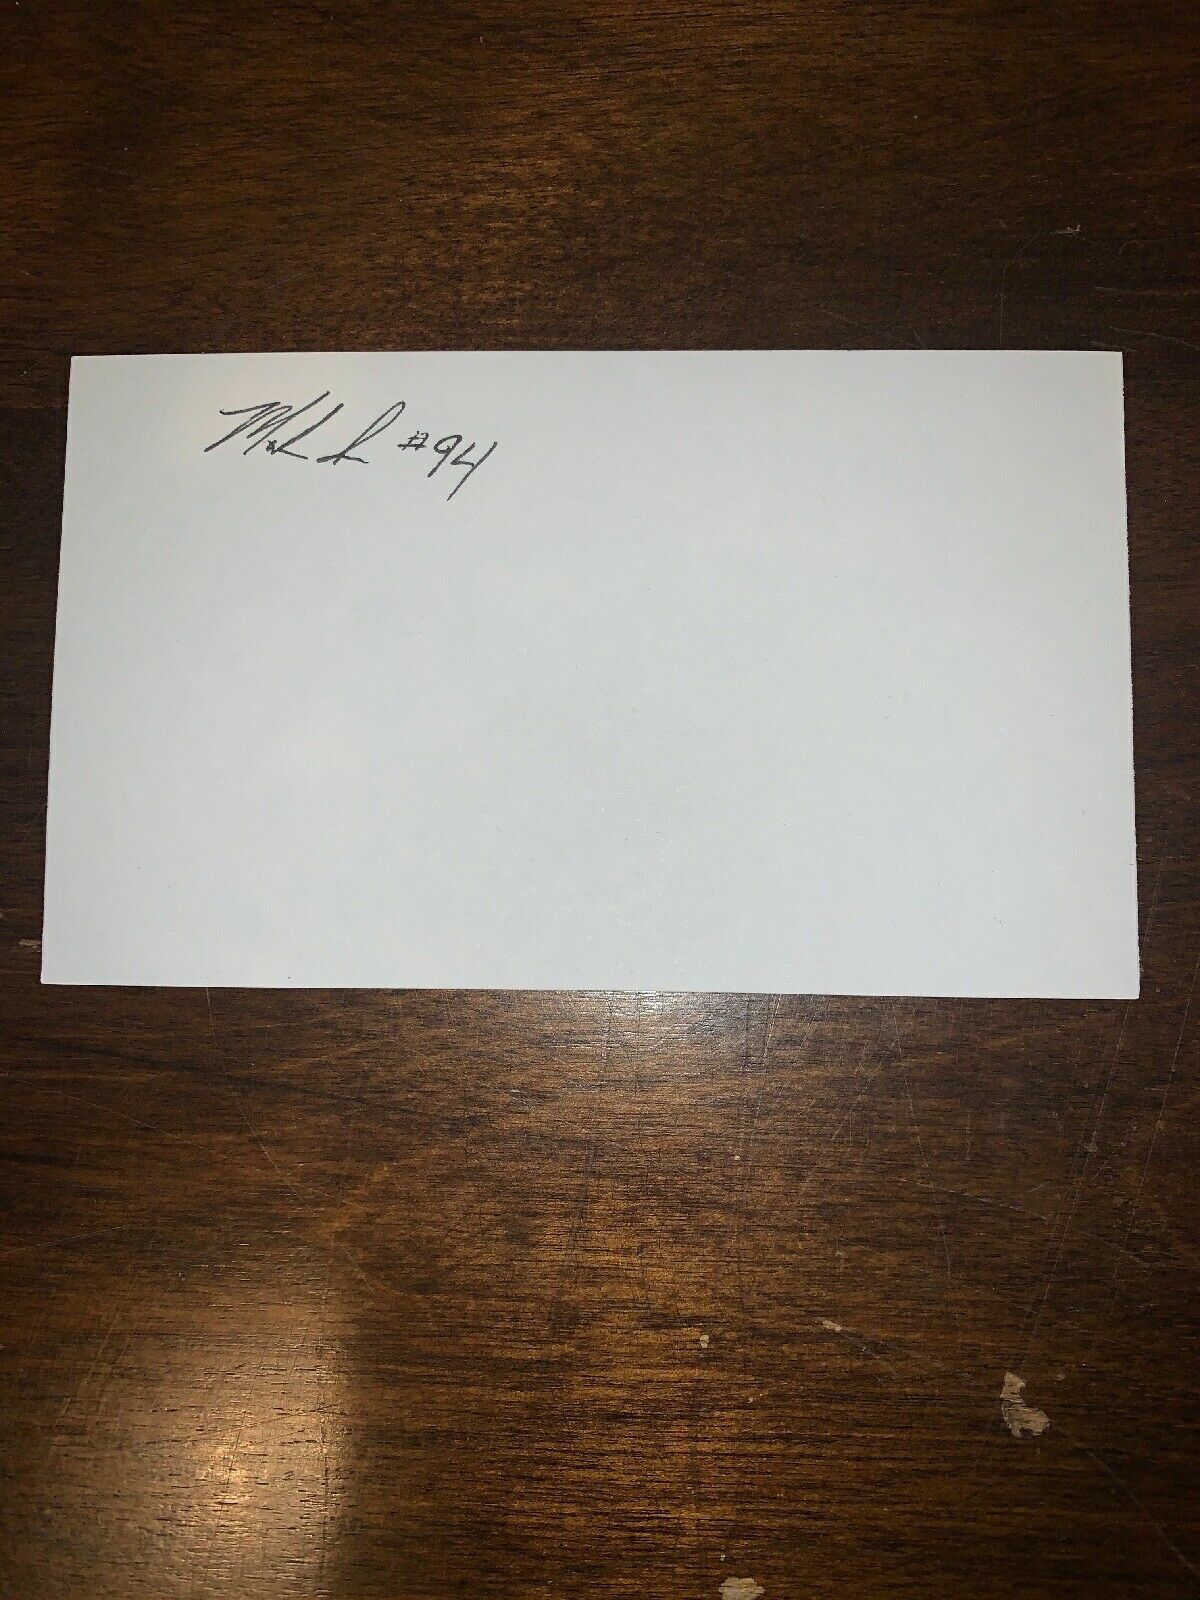 MARK ISON - BASKETBALL- AUTOGRAPH SIGNED - INDEX CARD -AUTHENTIC - C407